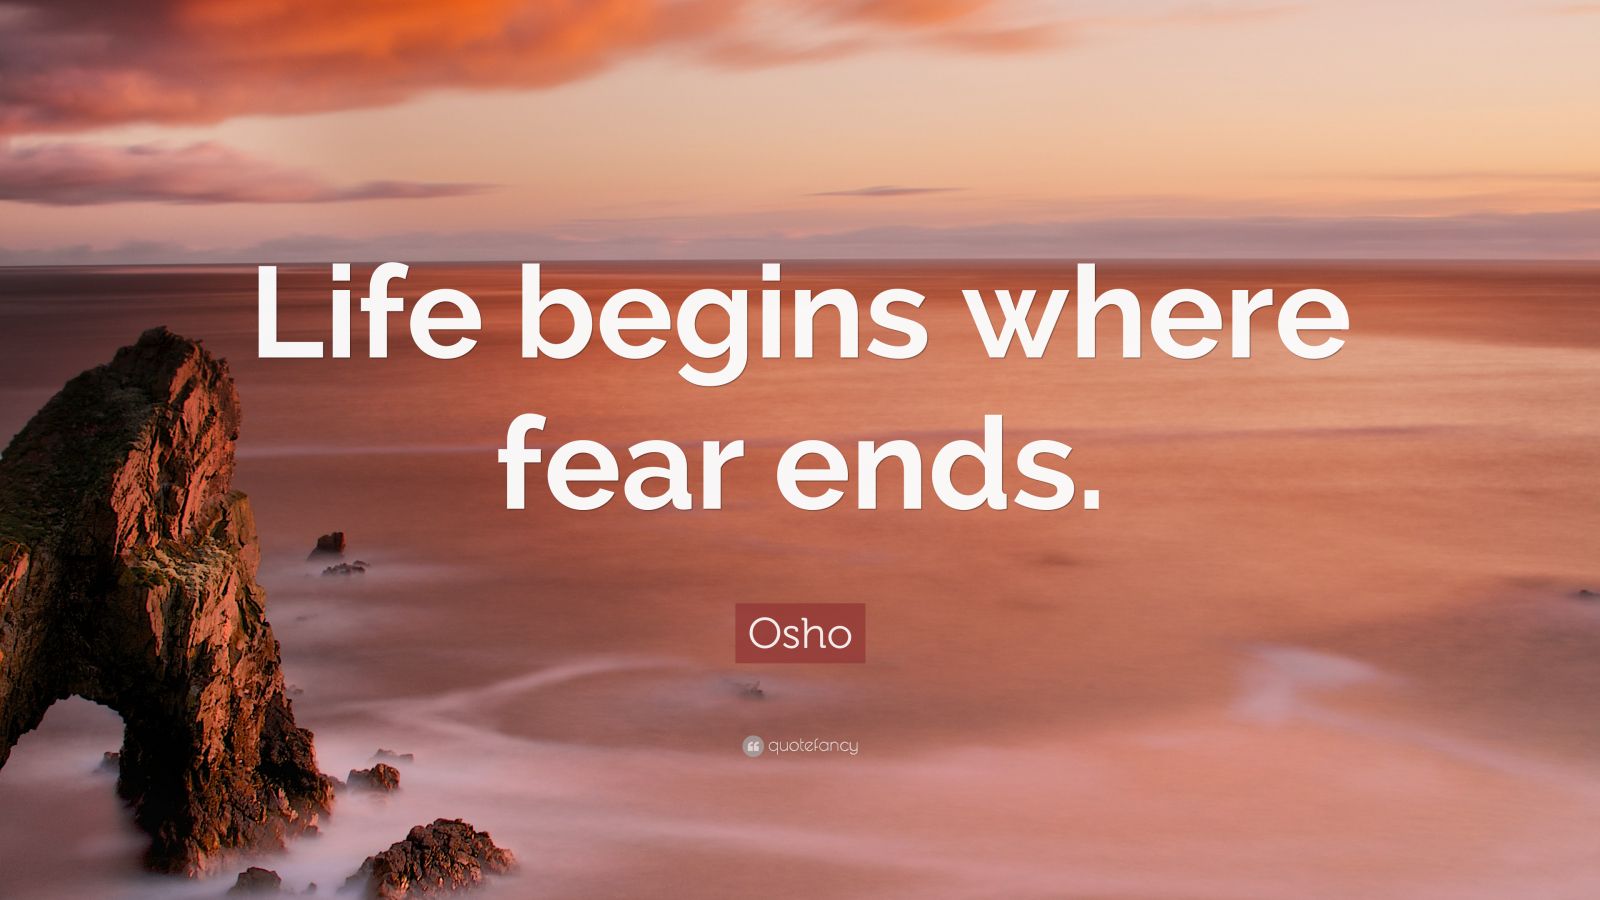 6360744 Osho Quote Life begins where fear ends